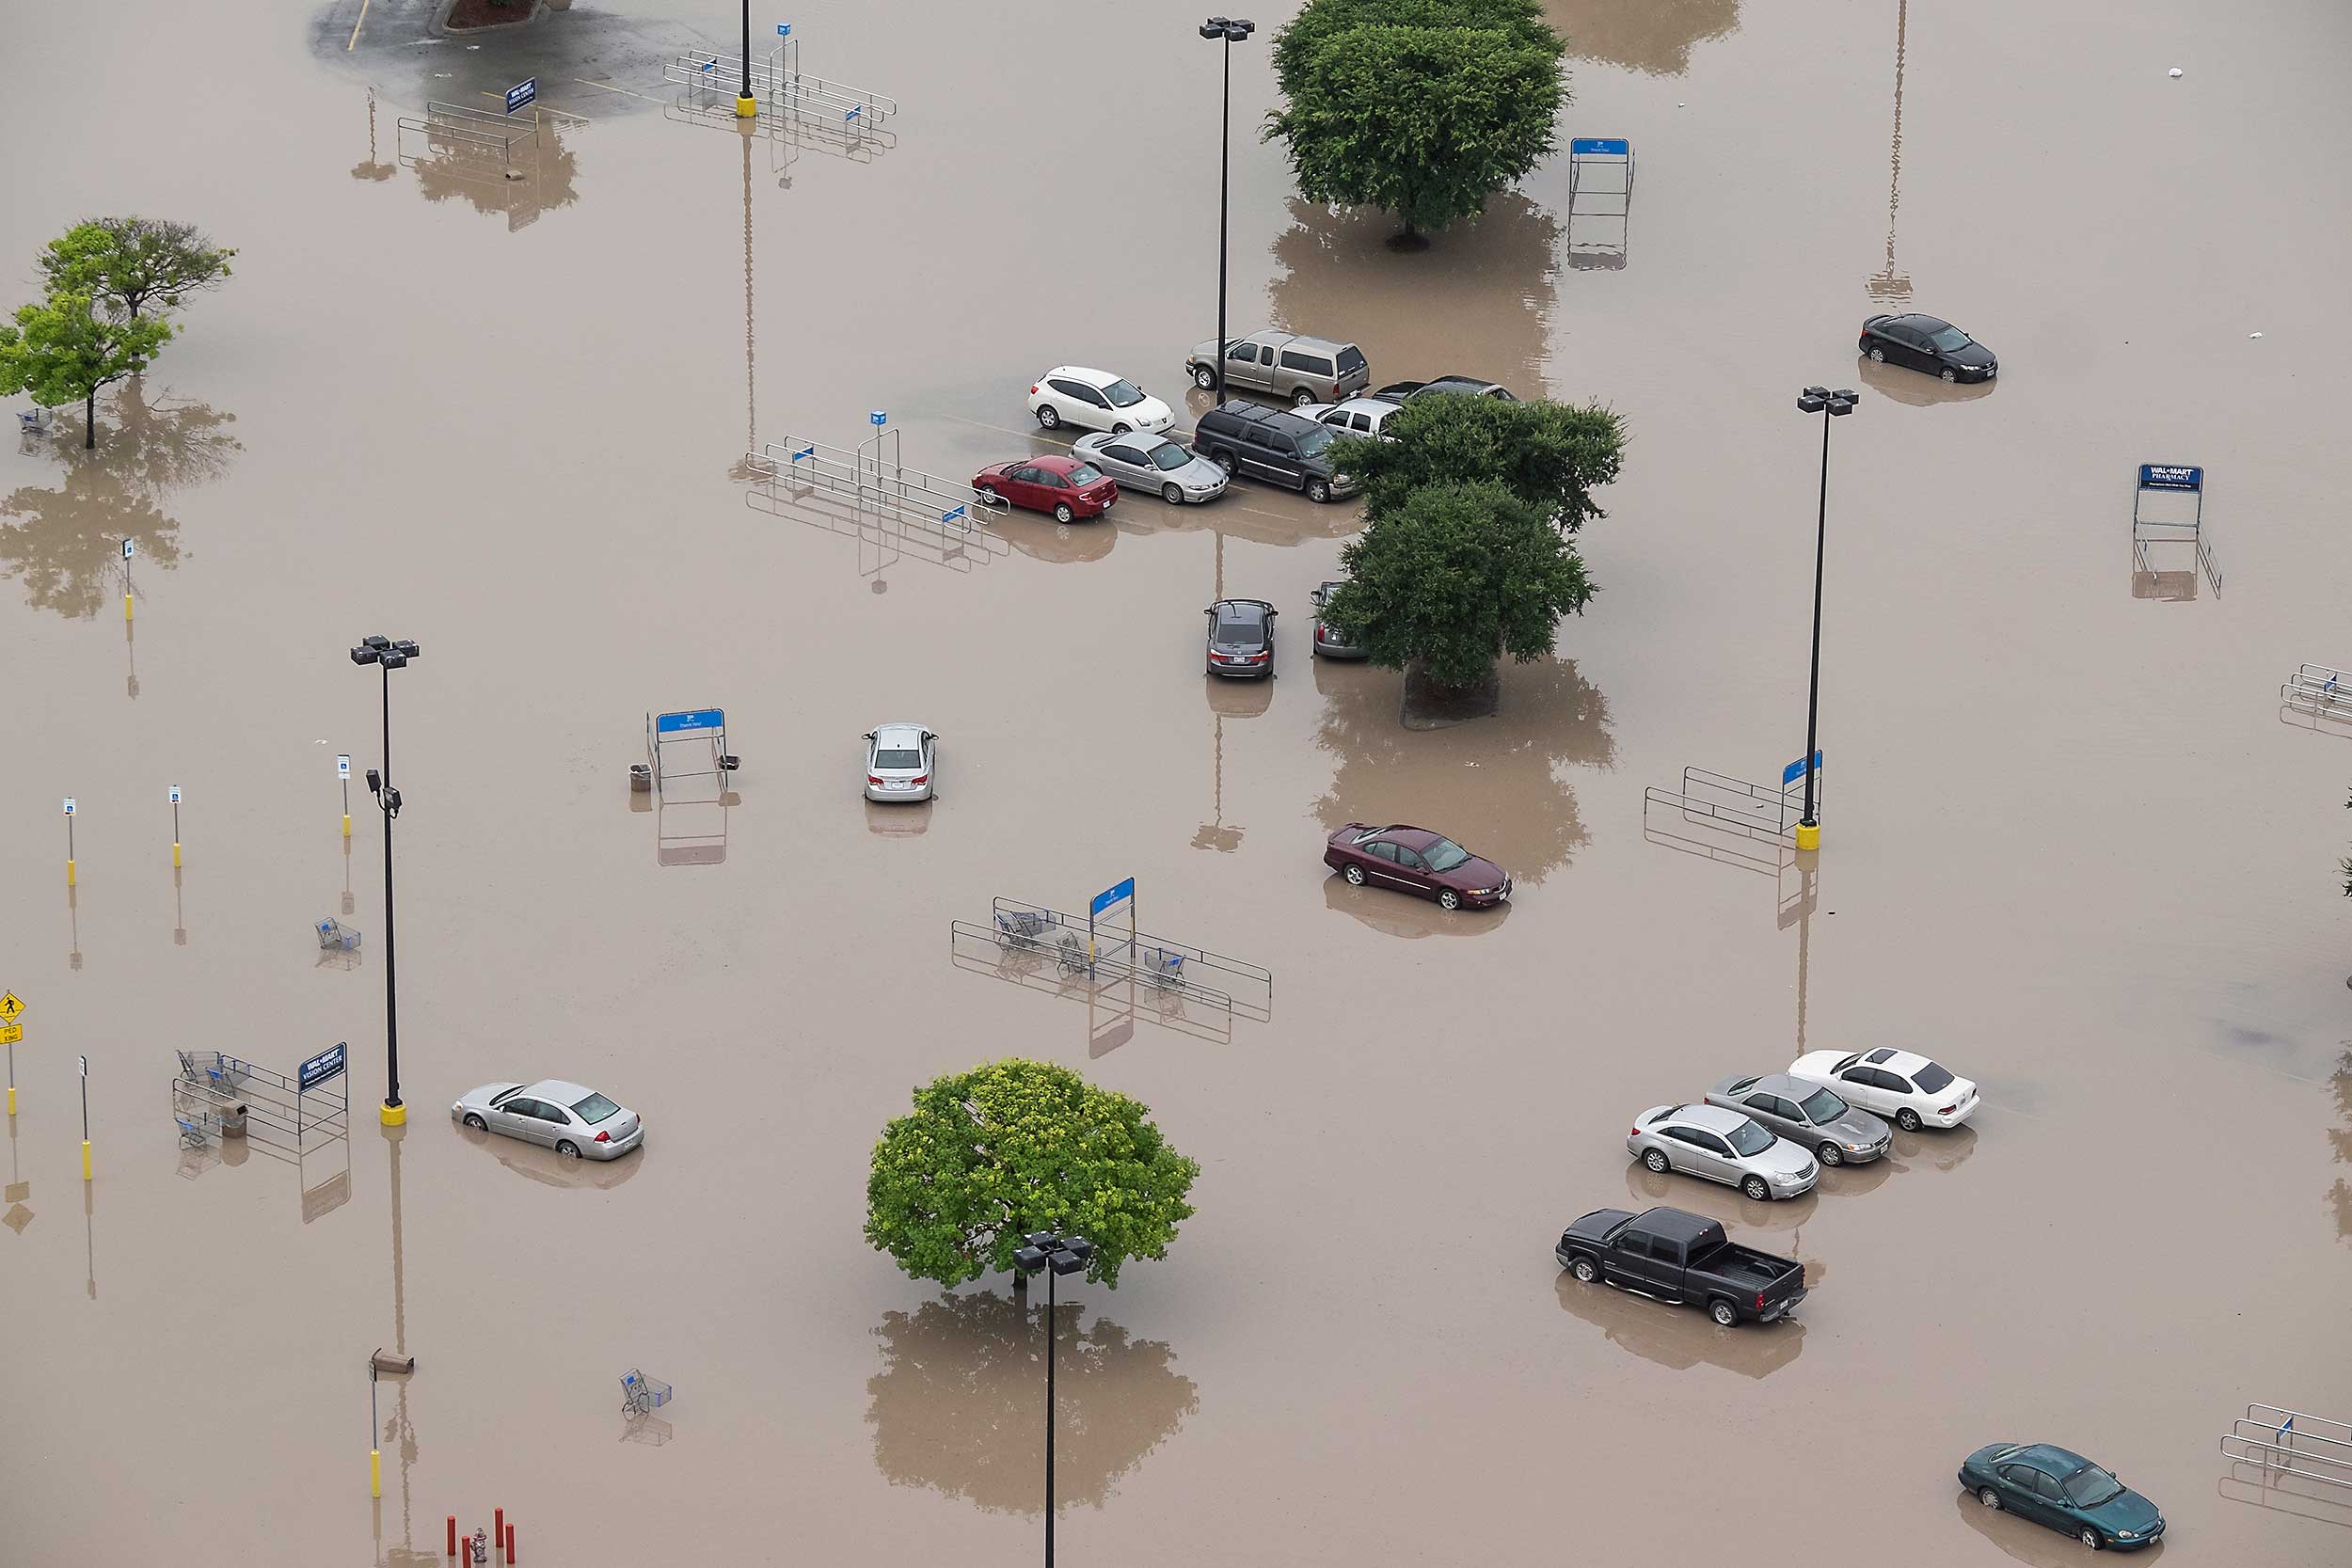 The parking lot of a Wal-Mart is submerged after the San Marcos River flooded in San Marcos, Texas on May 24, 2015.